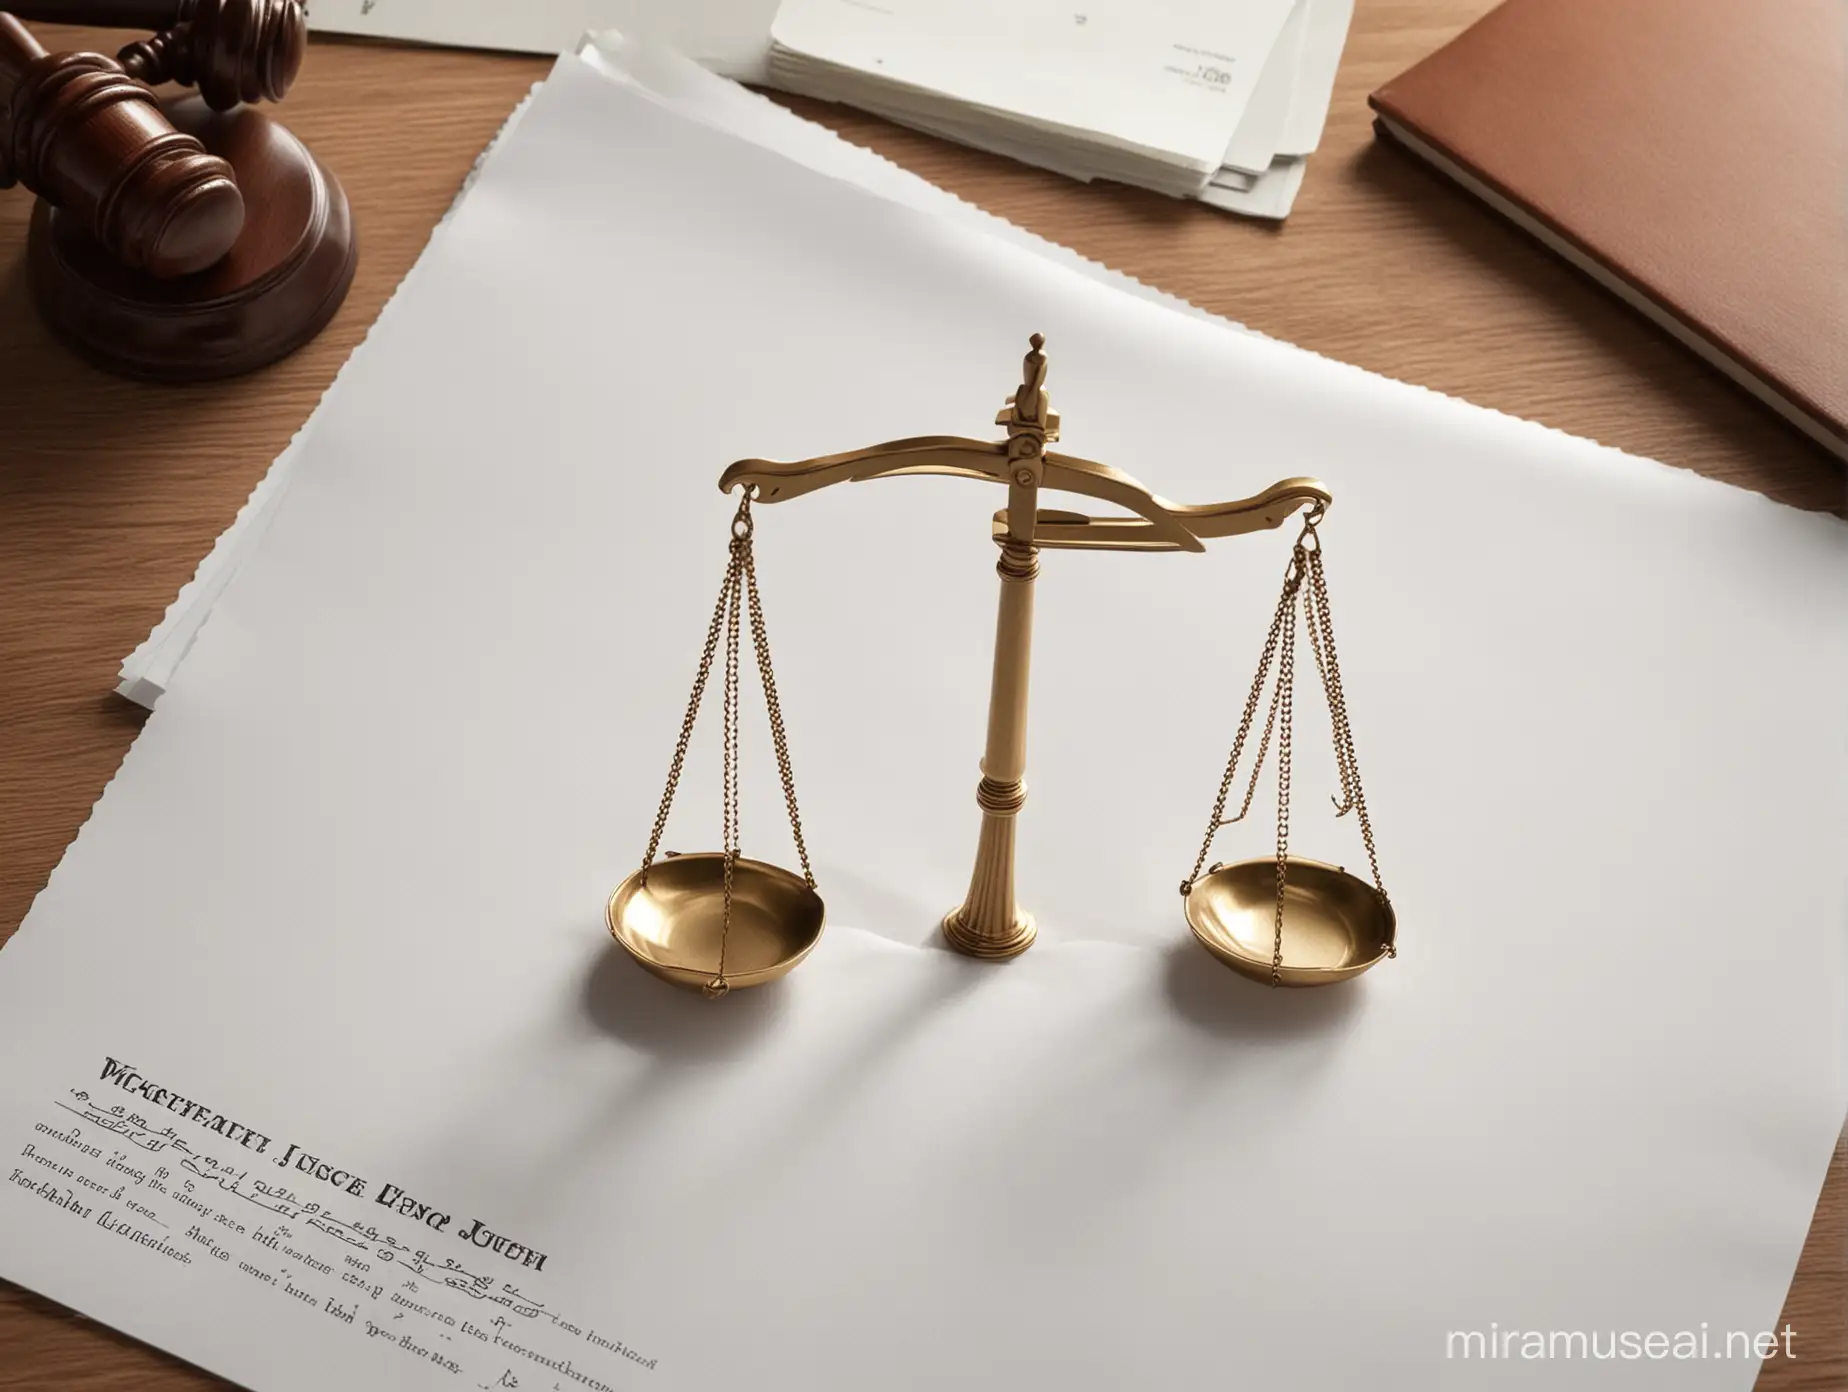 Legal Justice Scale and LawRelated Items on White Desk